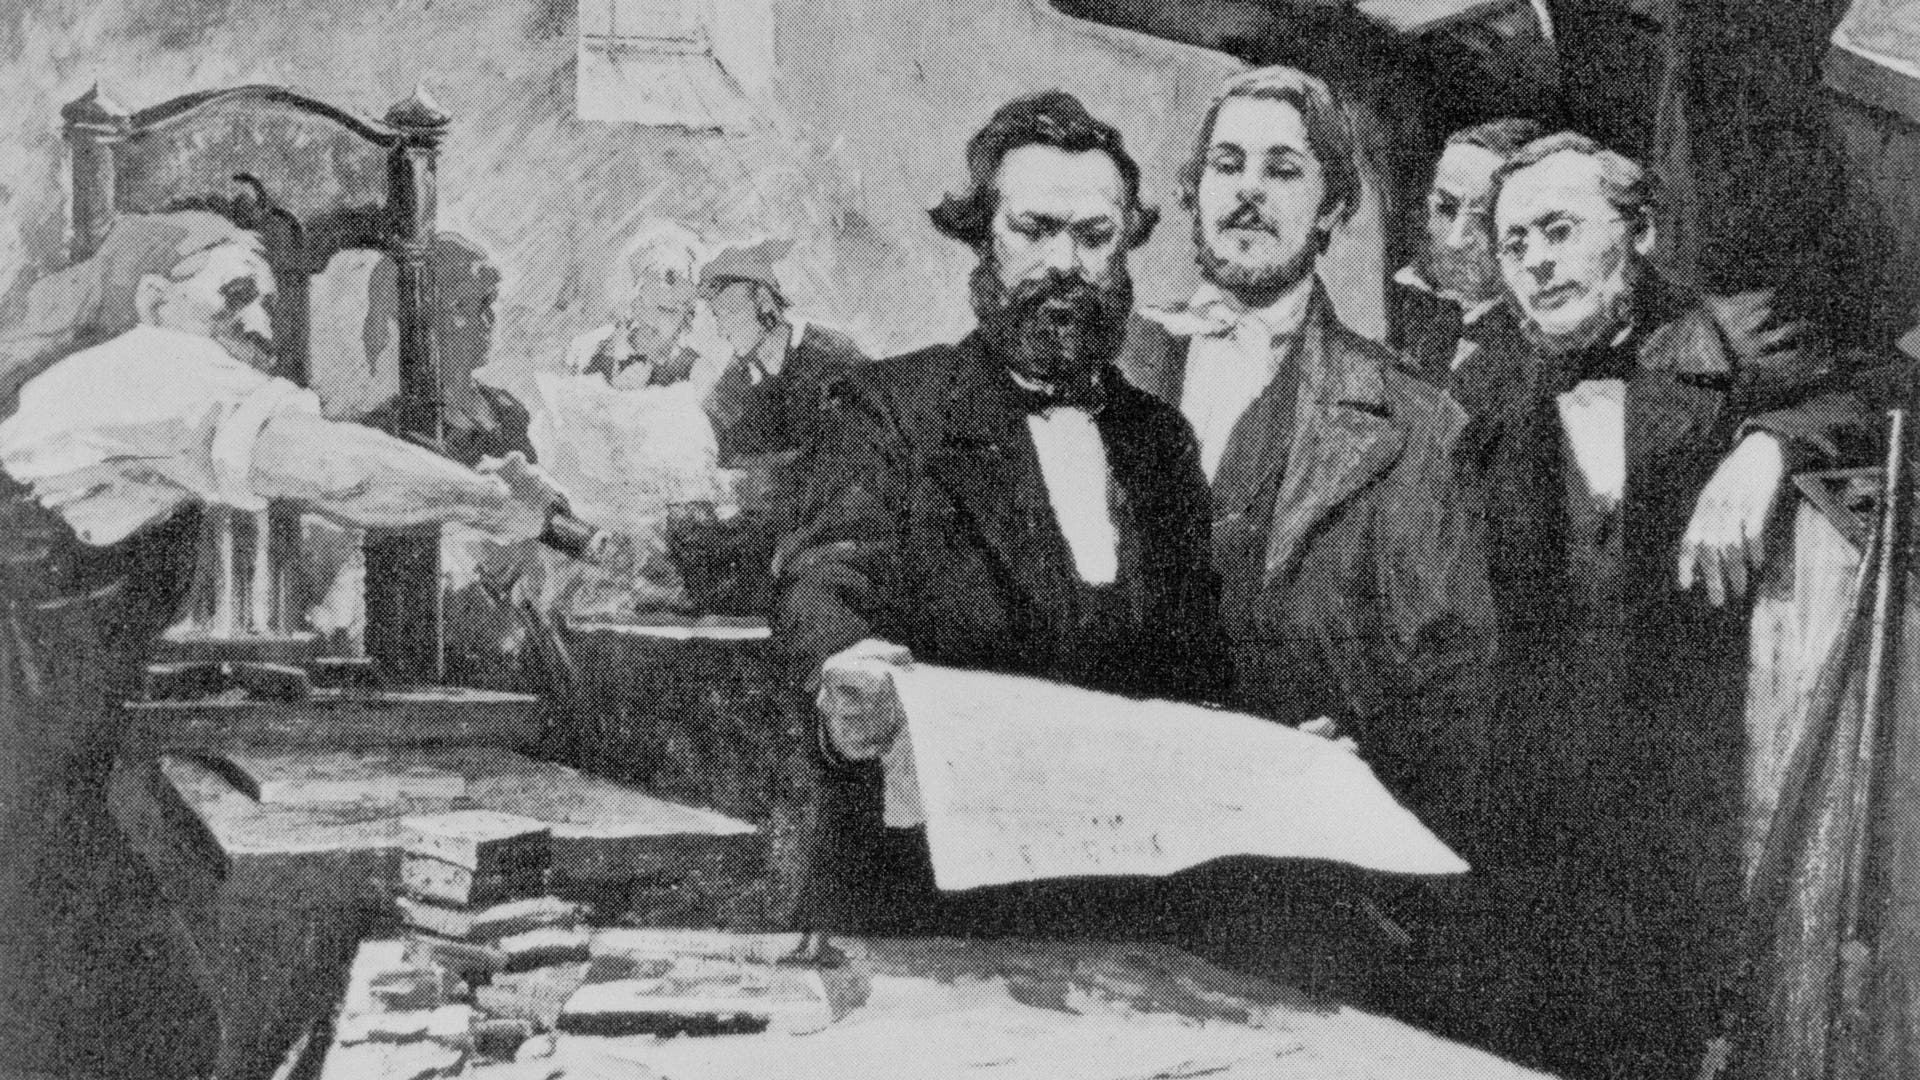 Friedrich Engels and Karl Marx During Press Operations(Original Caption) Karl Marx, (1818-1883) and Friedrich Engles (1820-1895), in pressrooms of Rheinische Zeitung which they jointly edited. Undated screened illustration.